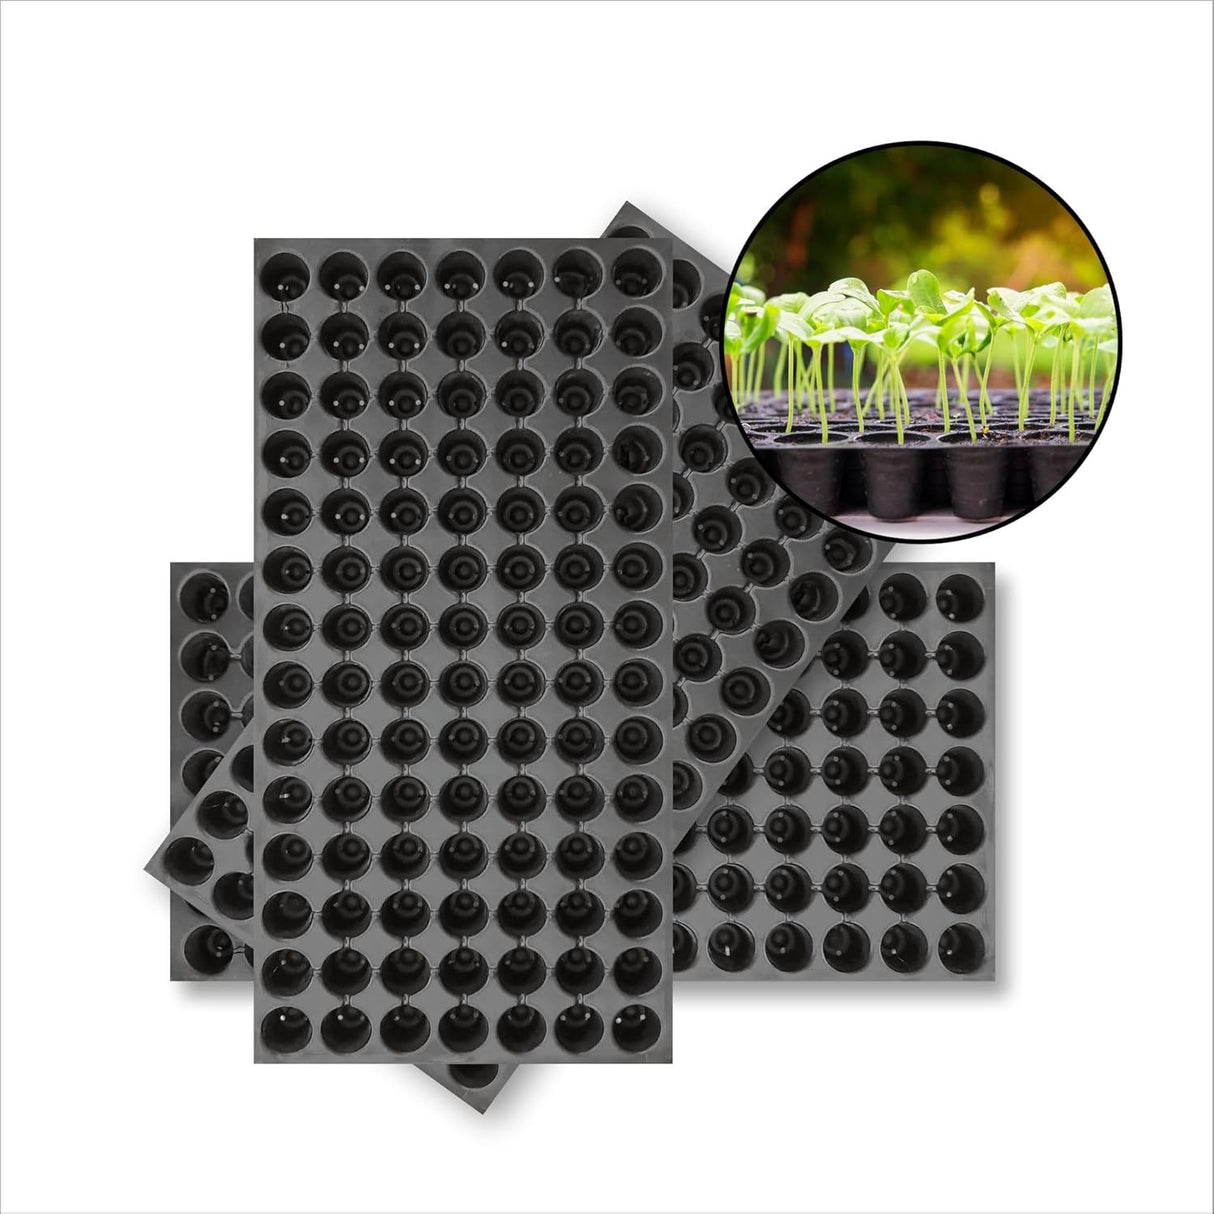 SINGHAL Seedling Tray - Pack of 12 (Black, 98 Holes) Germination Trays for Seedling, Nursery Trays for Plants, Reusable Plastic Trays for Garden Plantation, 98 Cavities Tray for Seeding